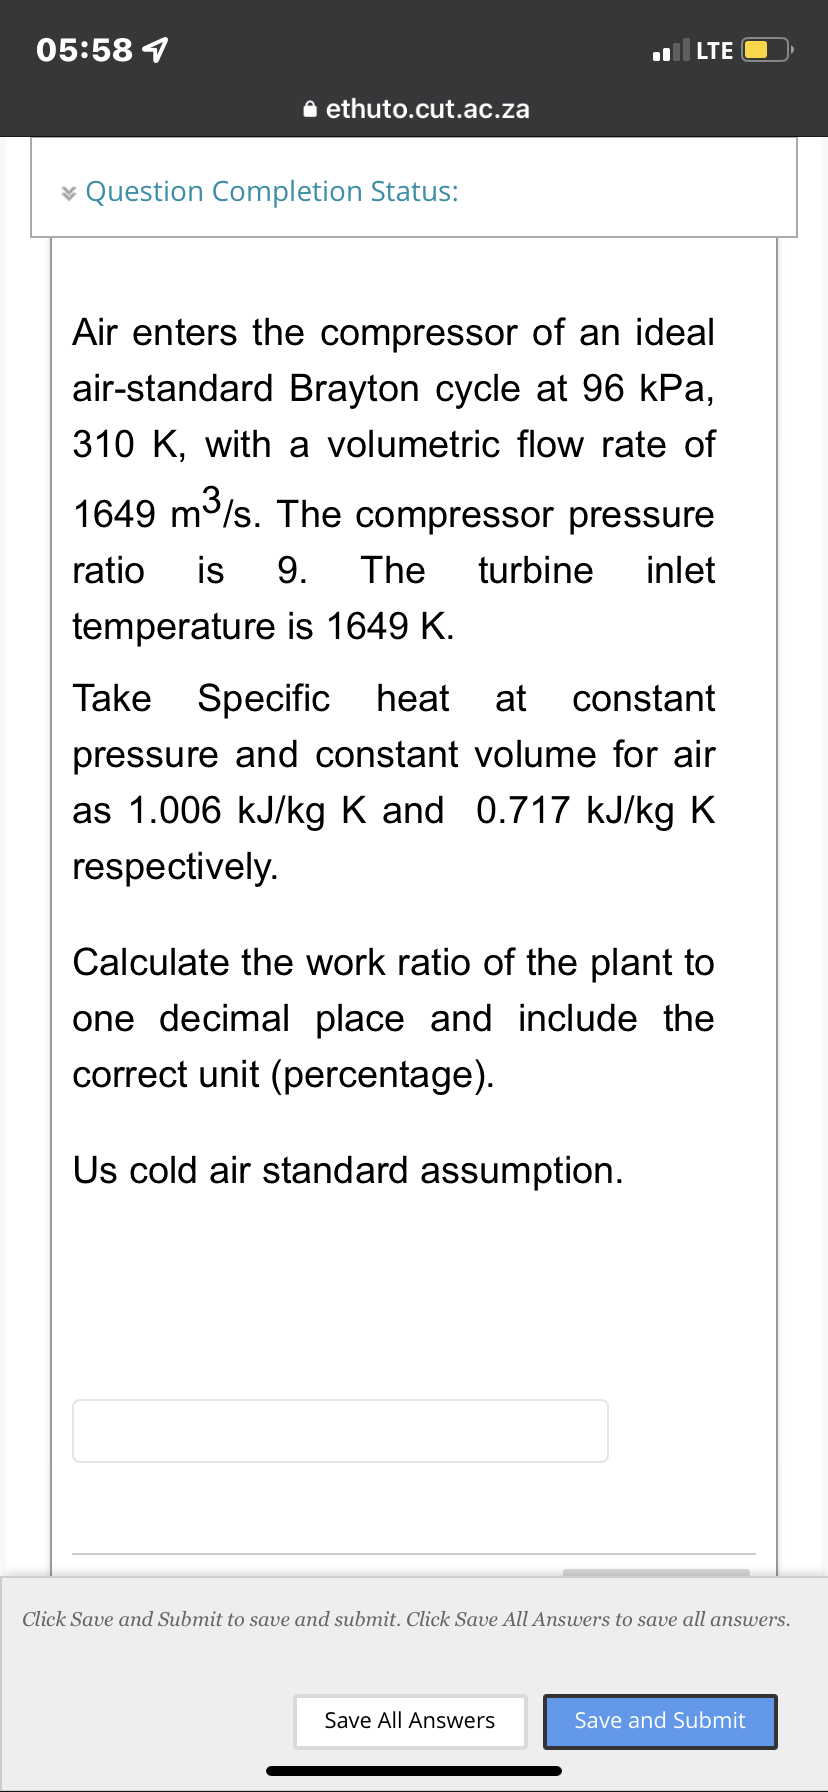 05:58 1
LTE
* Question Completion Status:
Air enters the compressor of an ideal
air-standard Brayton cycle at 96 kPa,
310 K, with a volumetric flow rate of
1649 m³/s. The compressor pressure
ratio is 9. The turbine inlet
temperature is 1649 K.
Take Specific heat at constant
pressure and constant volume for air
as 1.006 kJ/kg K and 0.717 kJ/kg K
respectively.
Calculate the work ratio of the plant to
one decimal place and include the
correct unit (percentage).
Us cold air standard assumption.
Click Save and Submit to save and submit. Click Save All Answers to save all answers.
Save All Answers
Save and Submit
ethuto.cut.ac.za